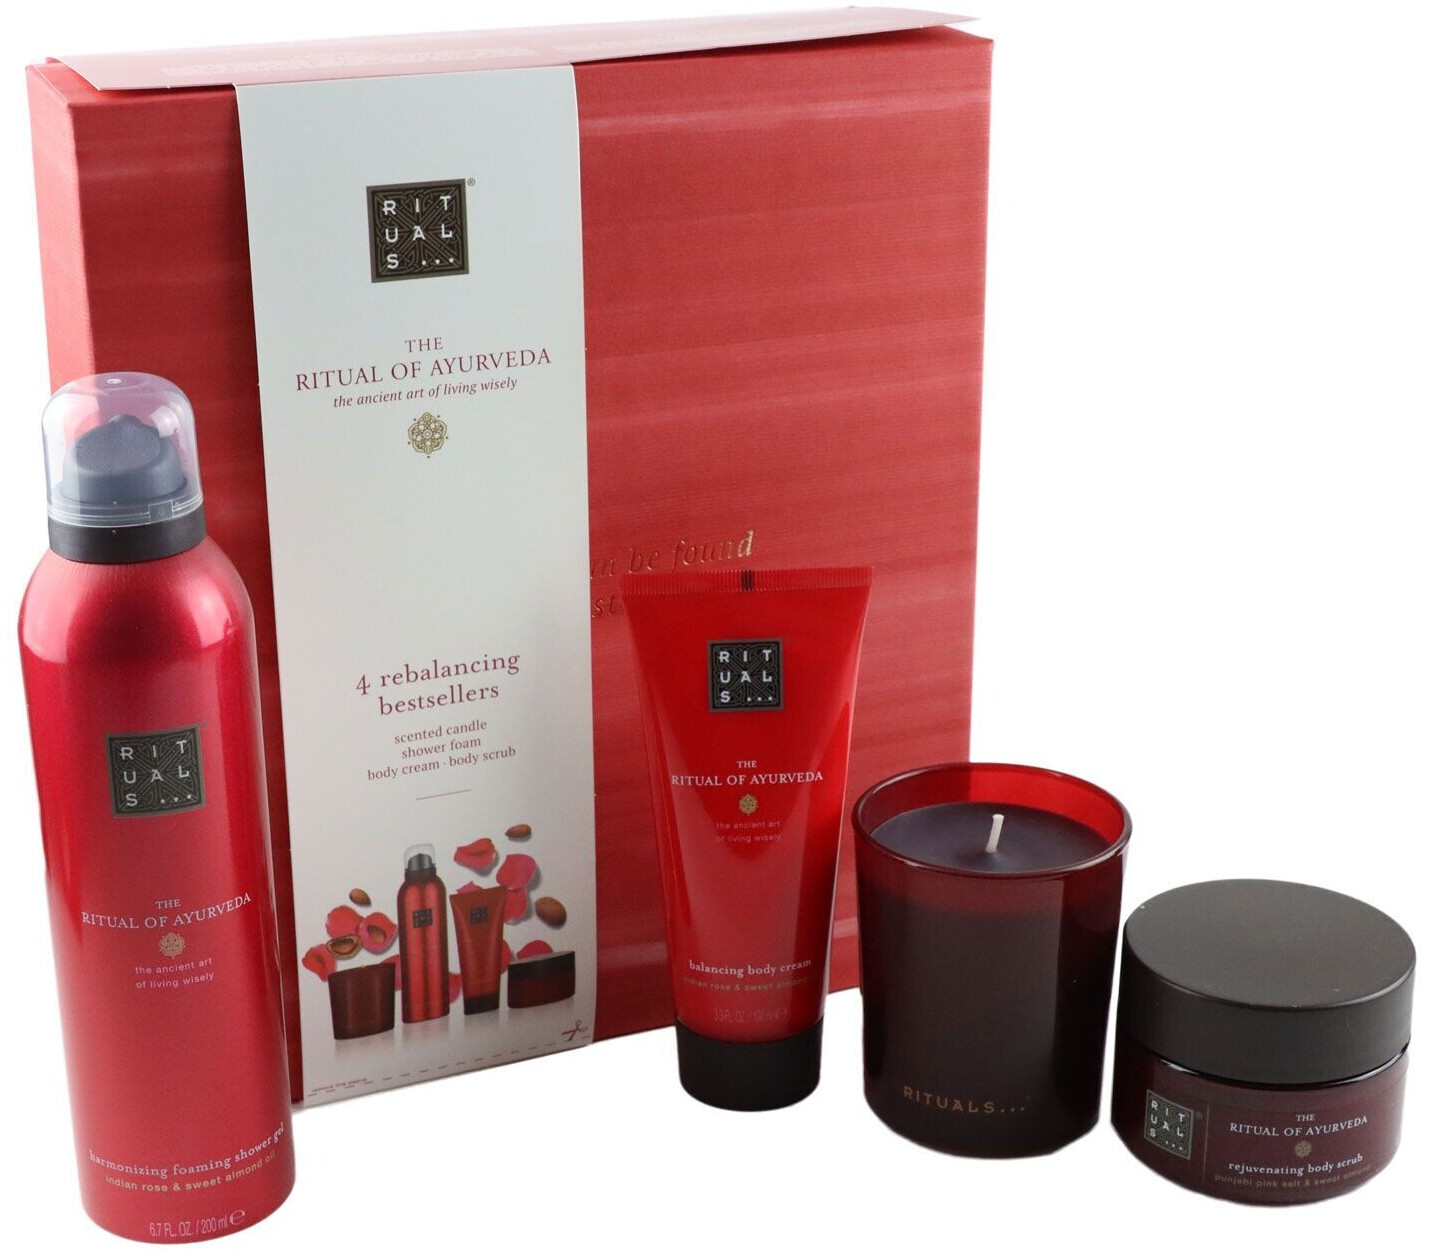 Buy Rituals The Ritual of Ayurveda Medium Gift from £28.41 (Today) – Best  Deals on